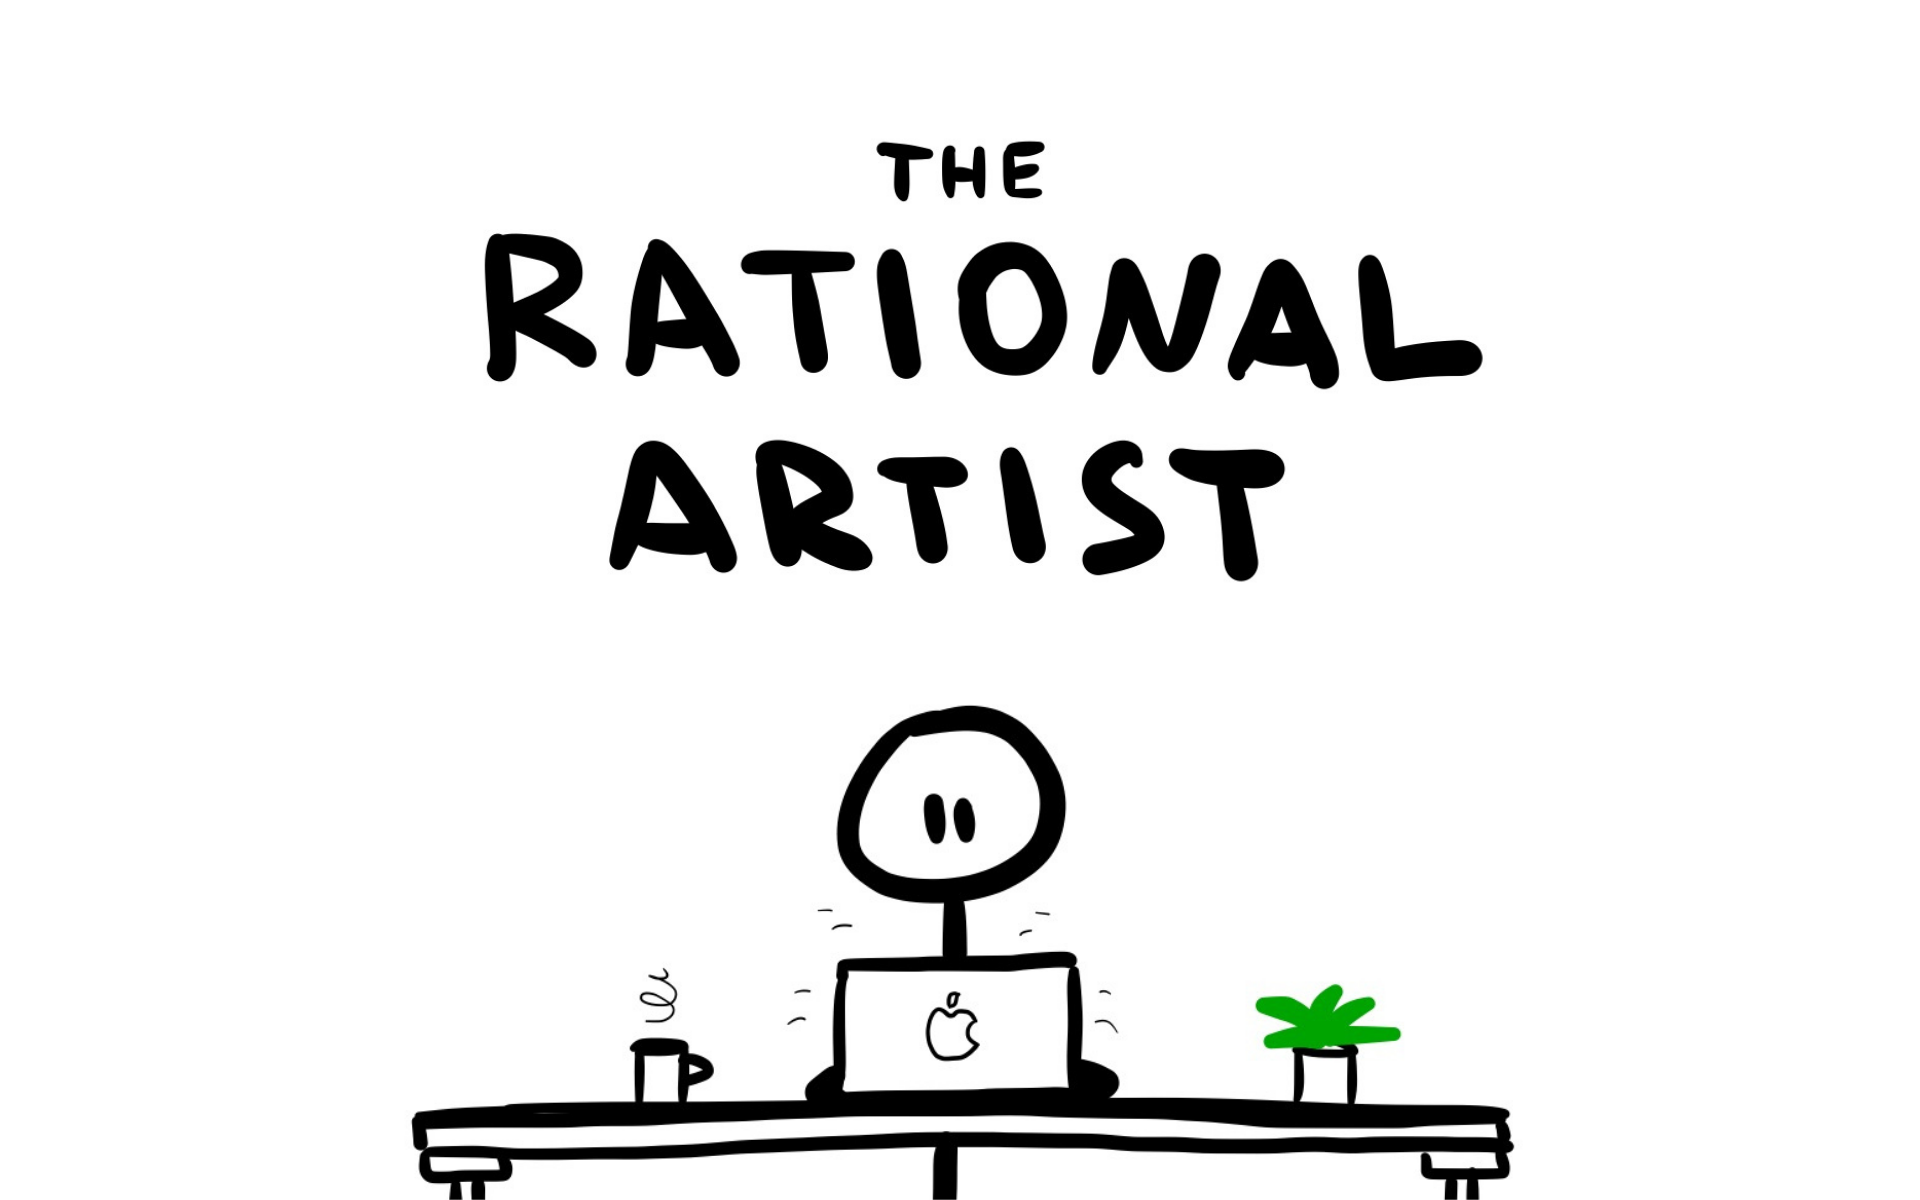 Rational Artist - The ideal way to work